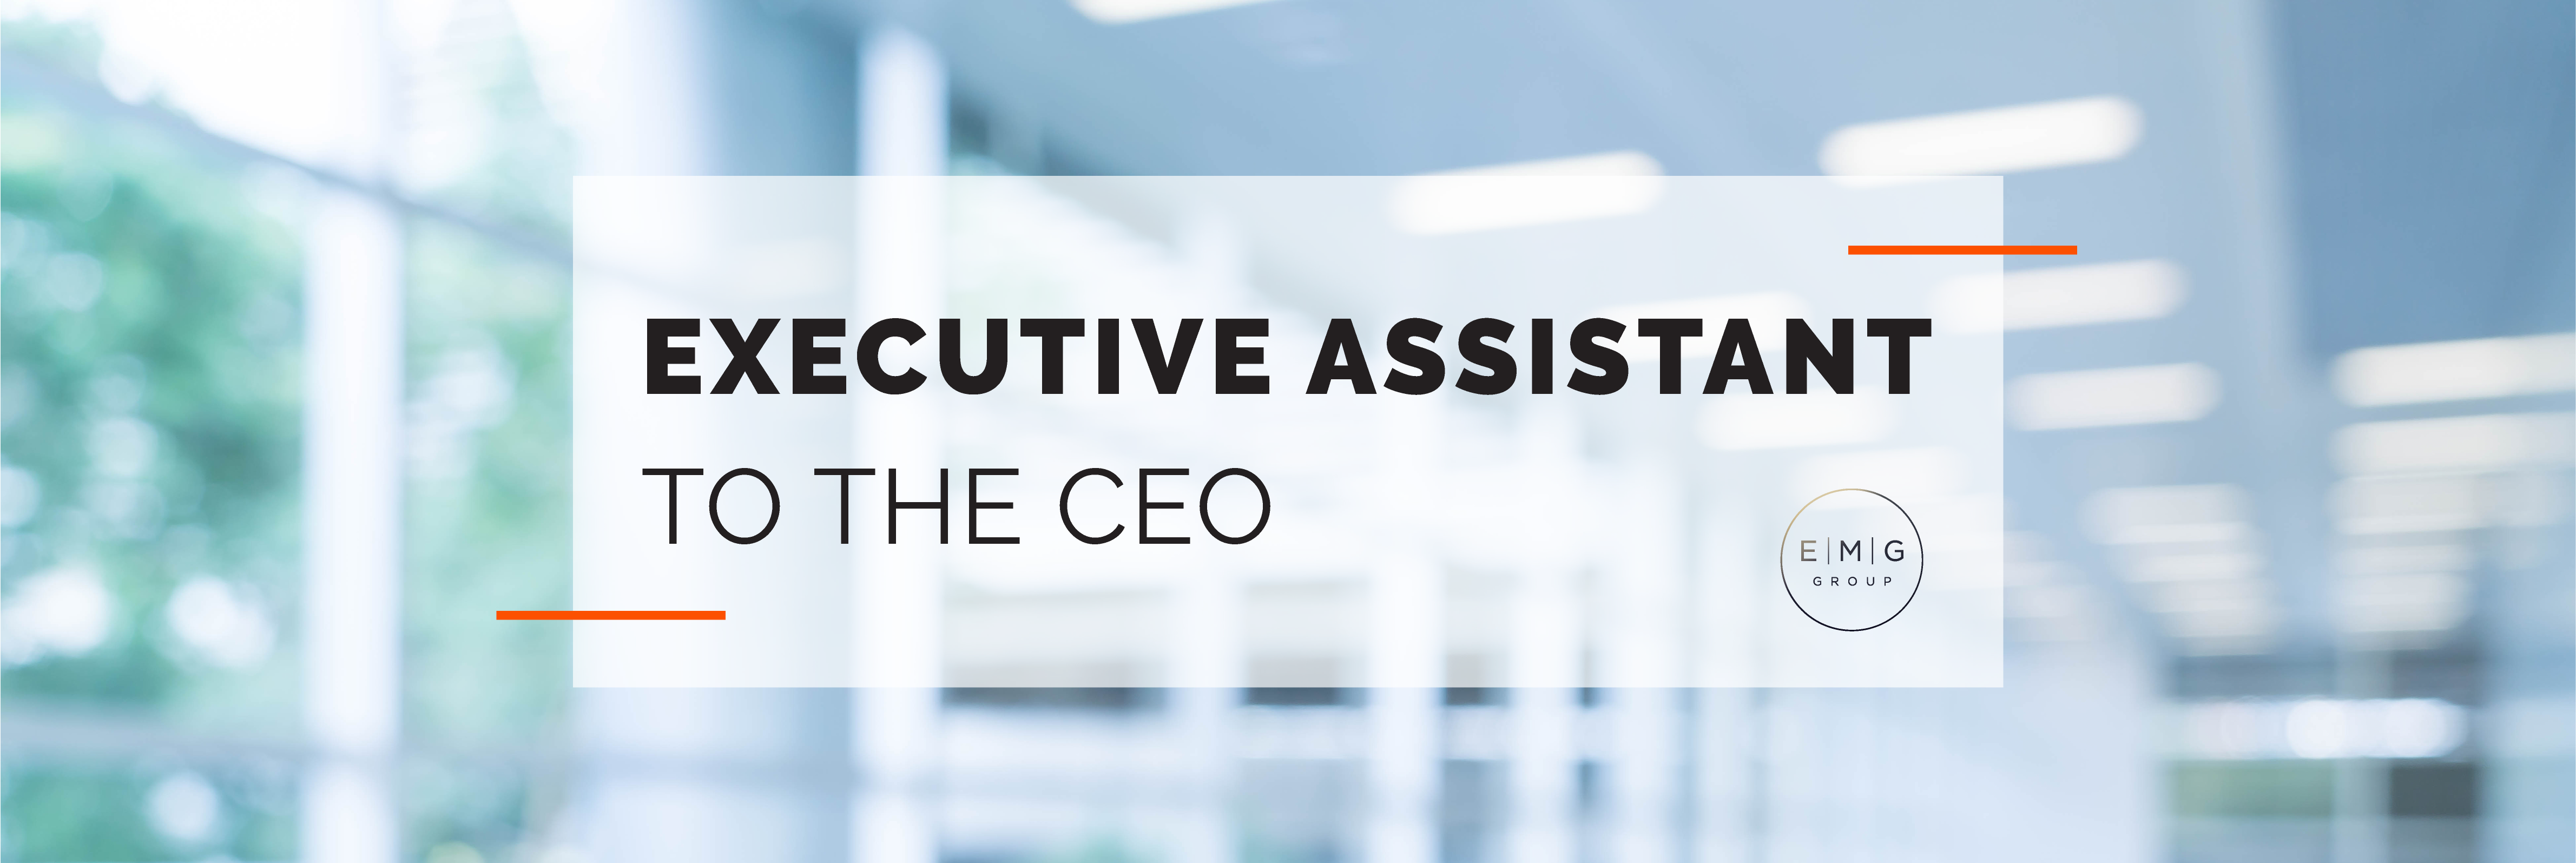 We are looking for an Executive Assistant to the CEO